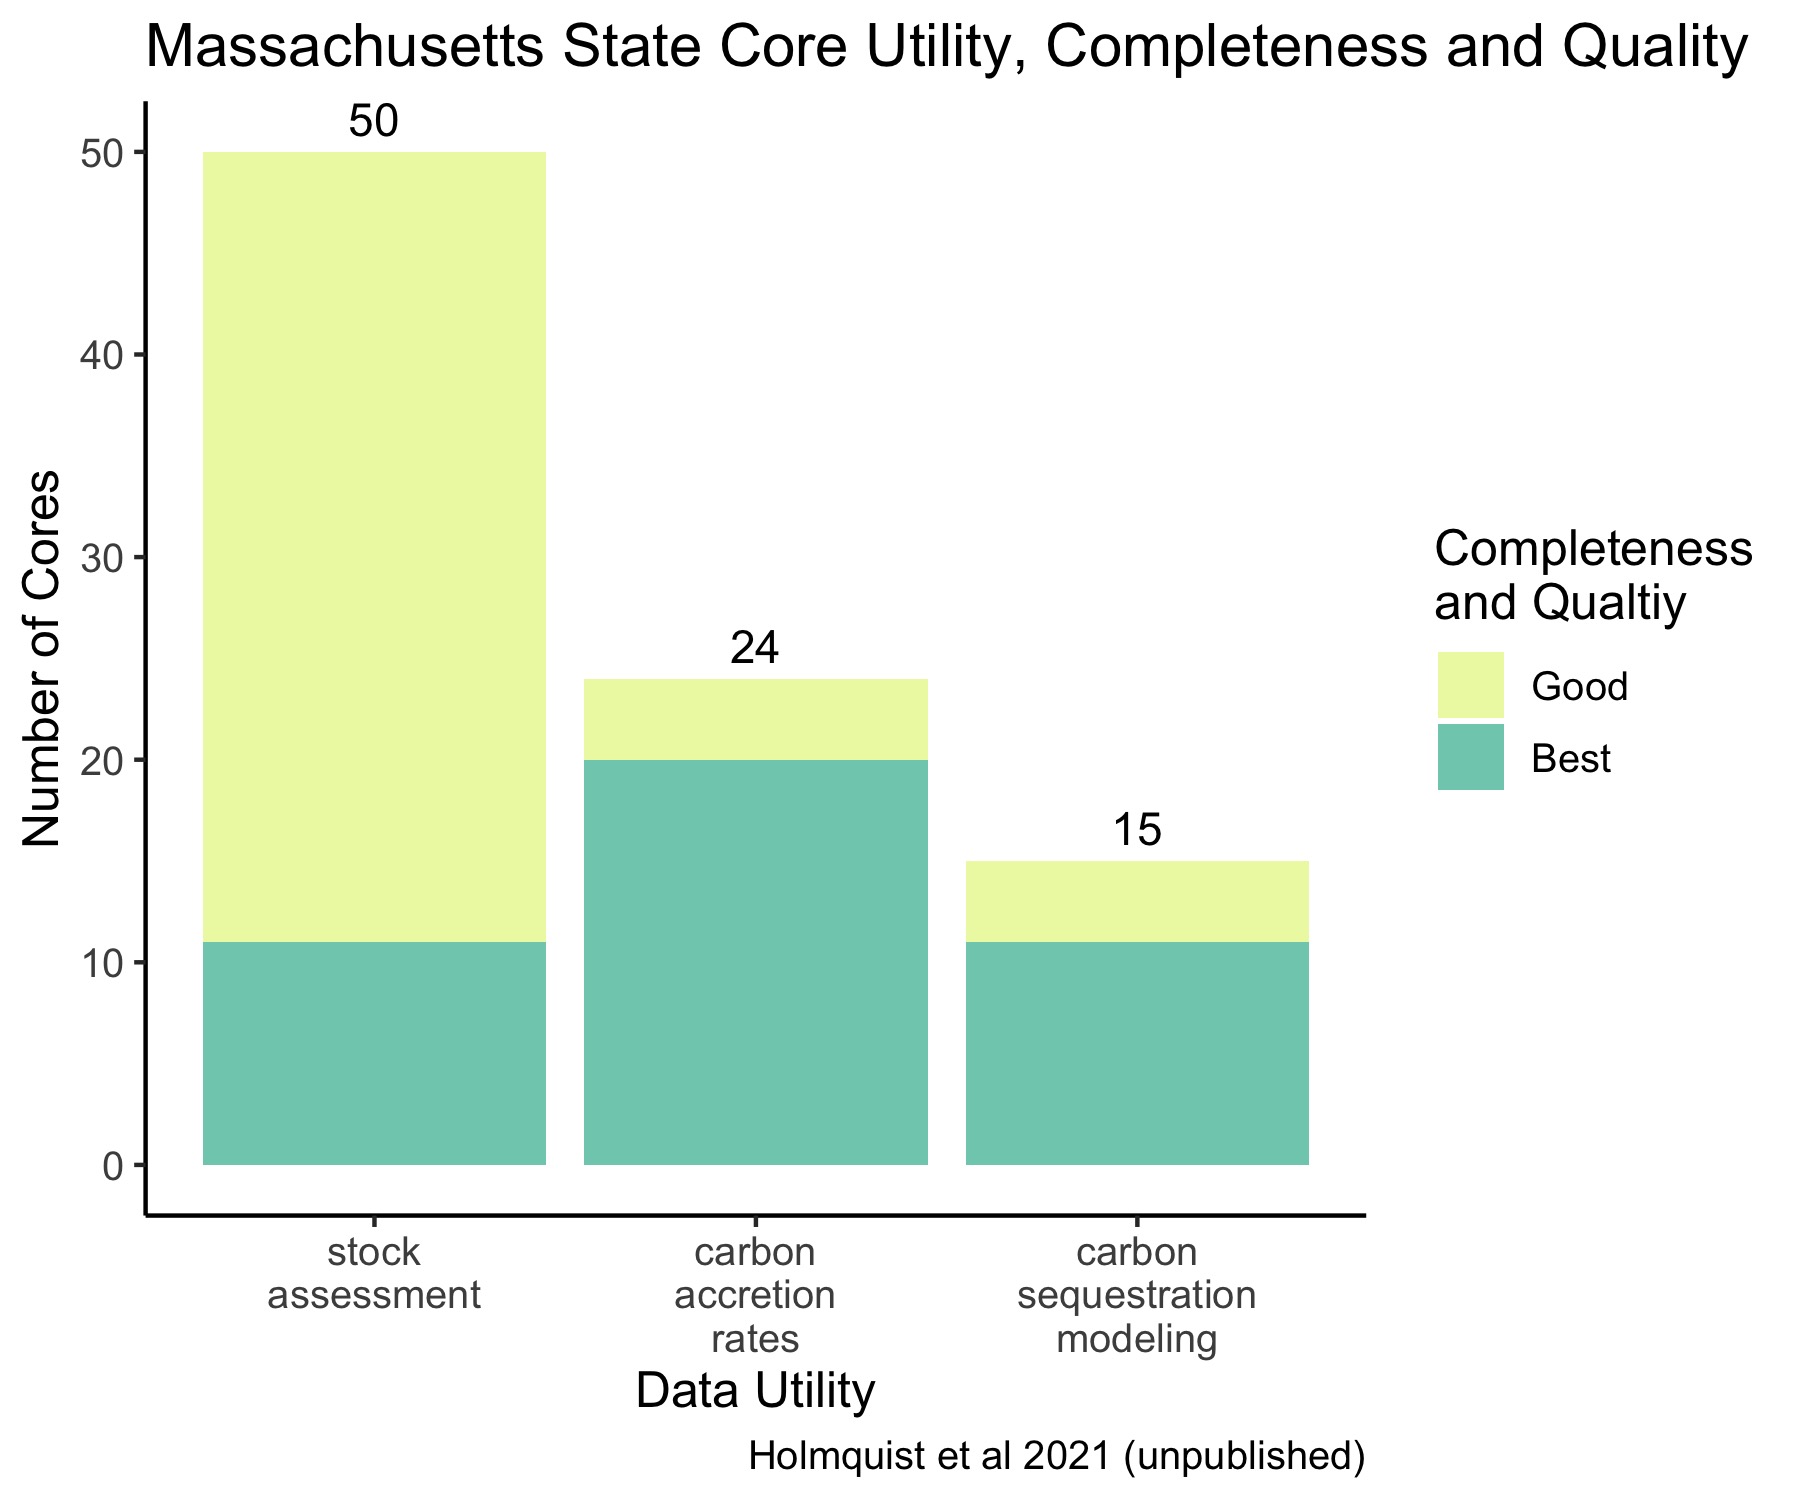 Massachusetts State Core Data Utility, Completeness, and Quality.